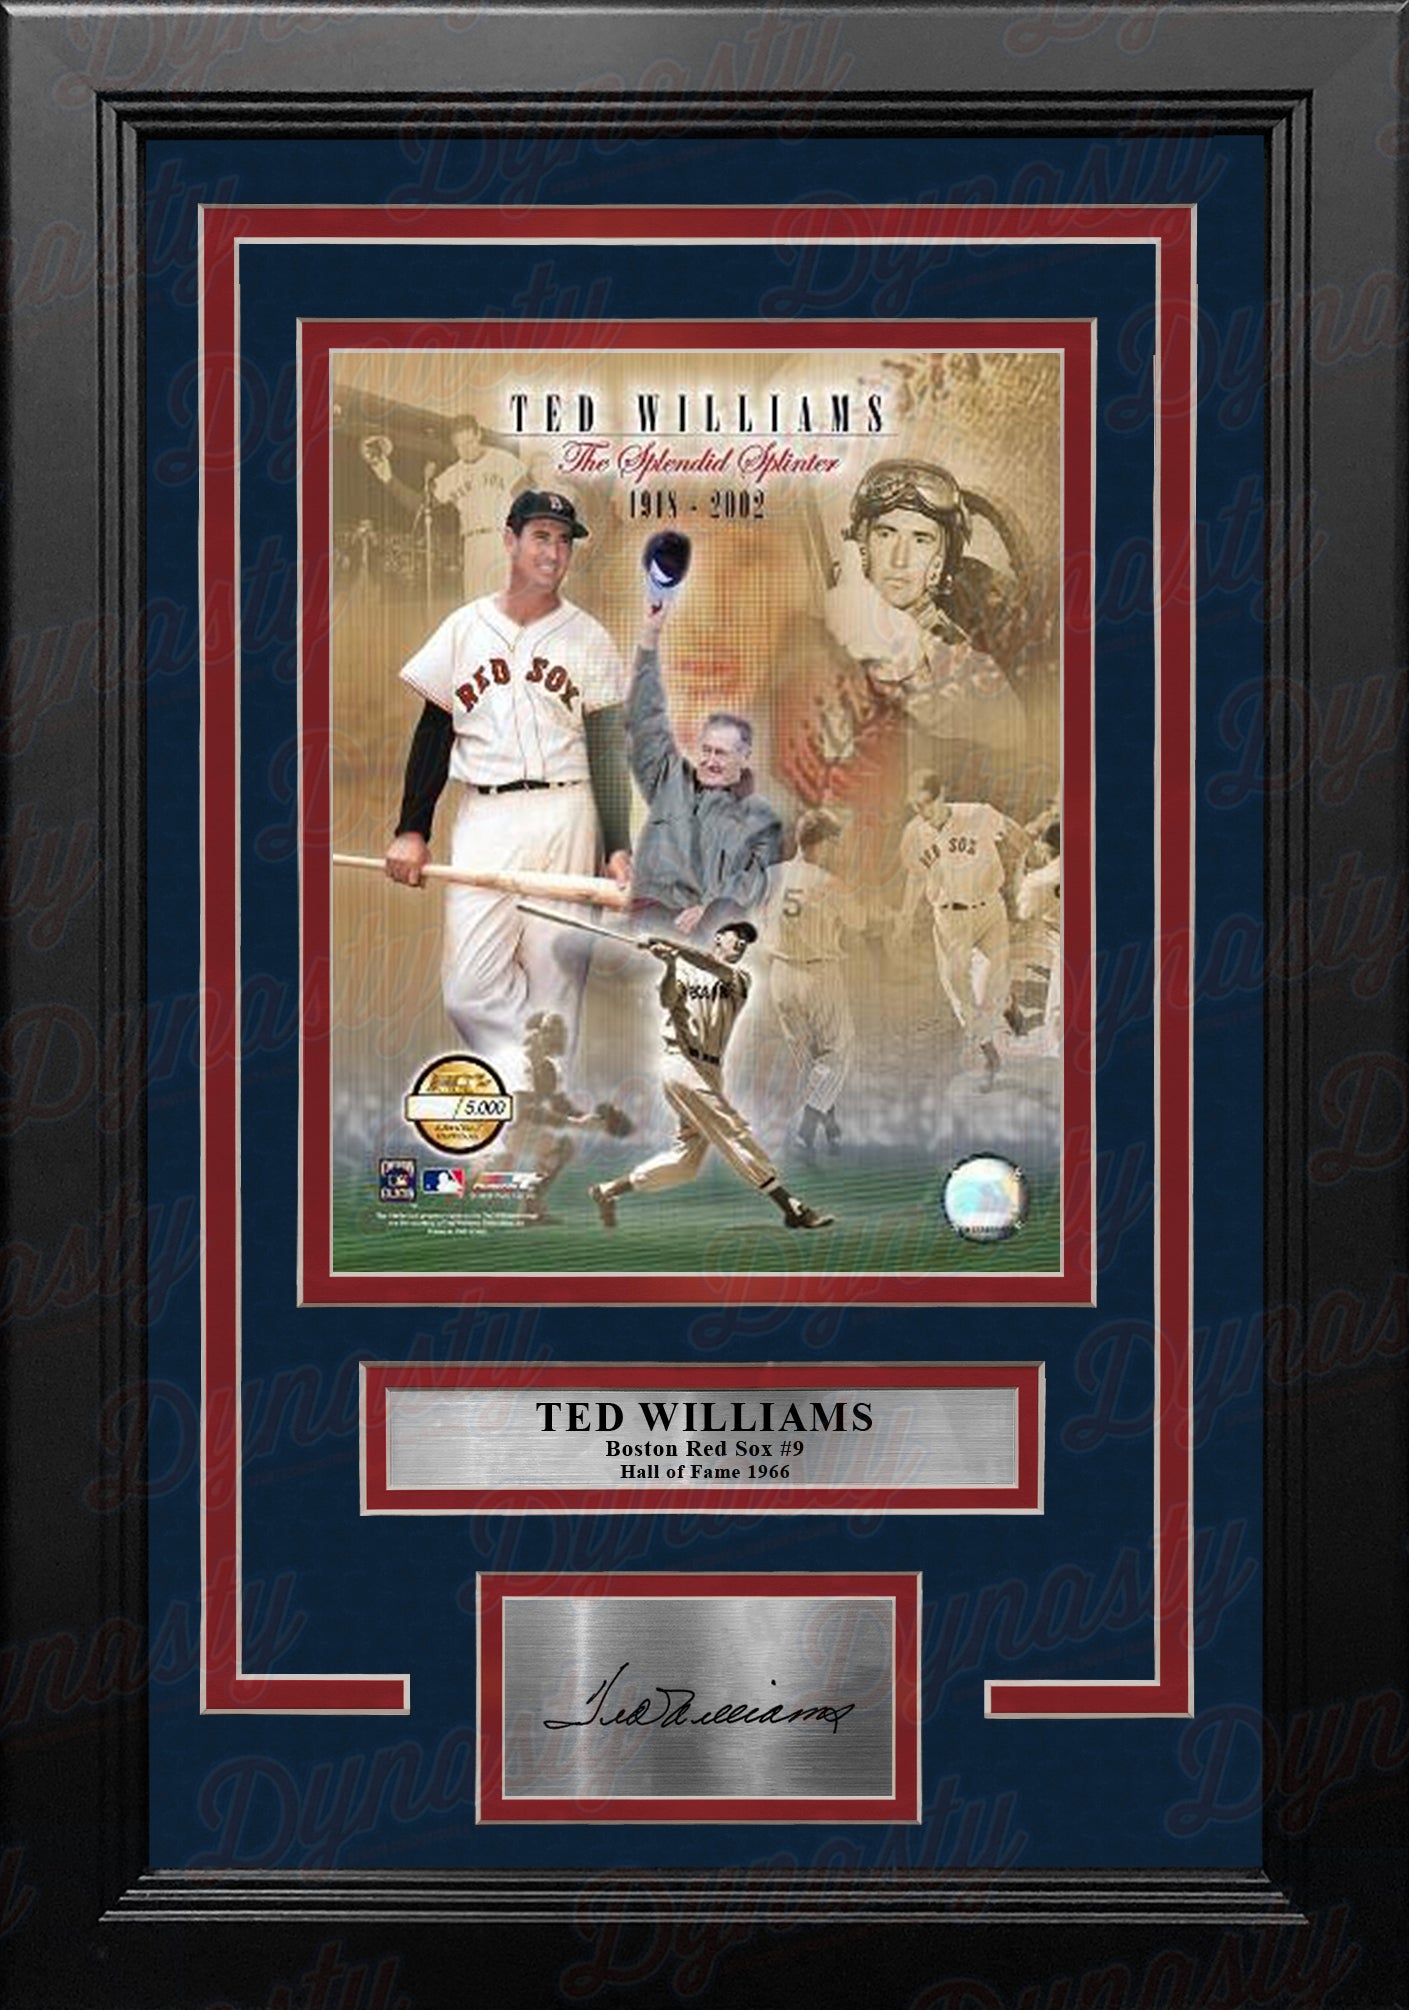 Ted Williams Boston Red Sox Splendid Splinter 8x10 Framed Baseball Photo with Engraved Autograph - Dynasty Sports & Framing 